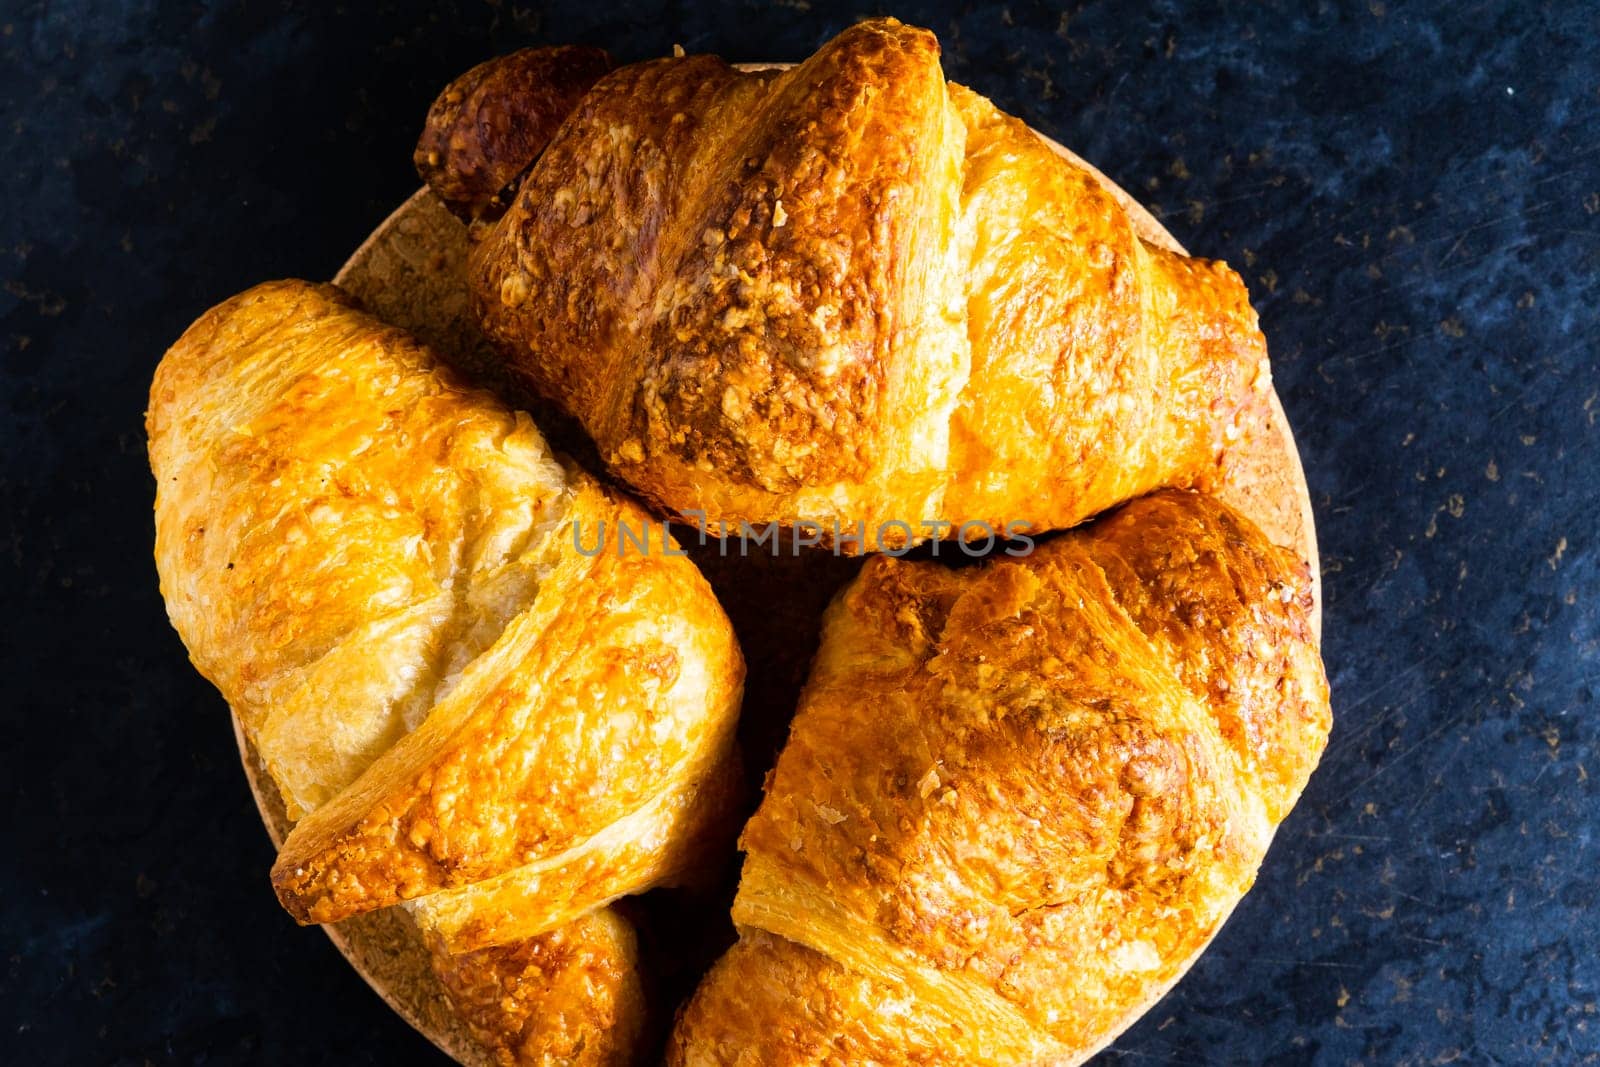 Freshly backed french croissant shiny in the rays of morning sun, dark background, kitchen